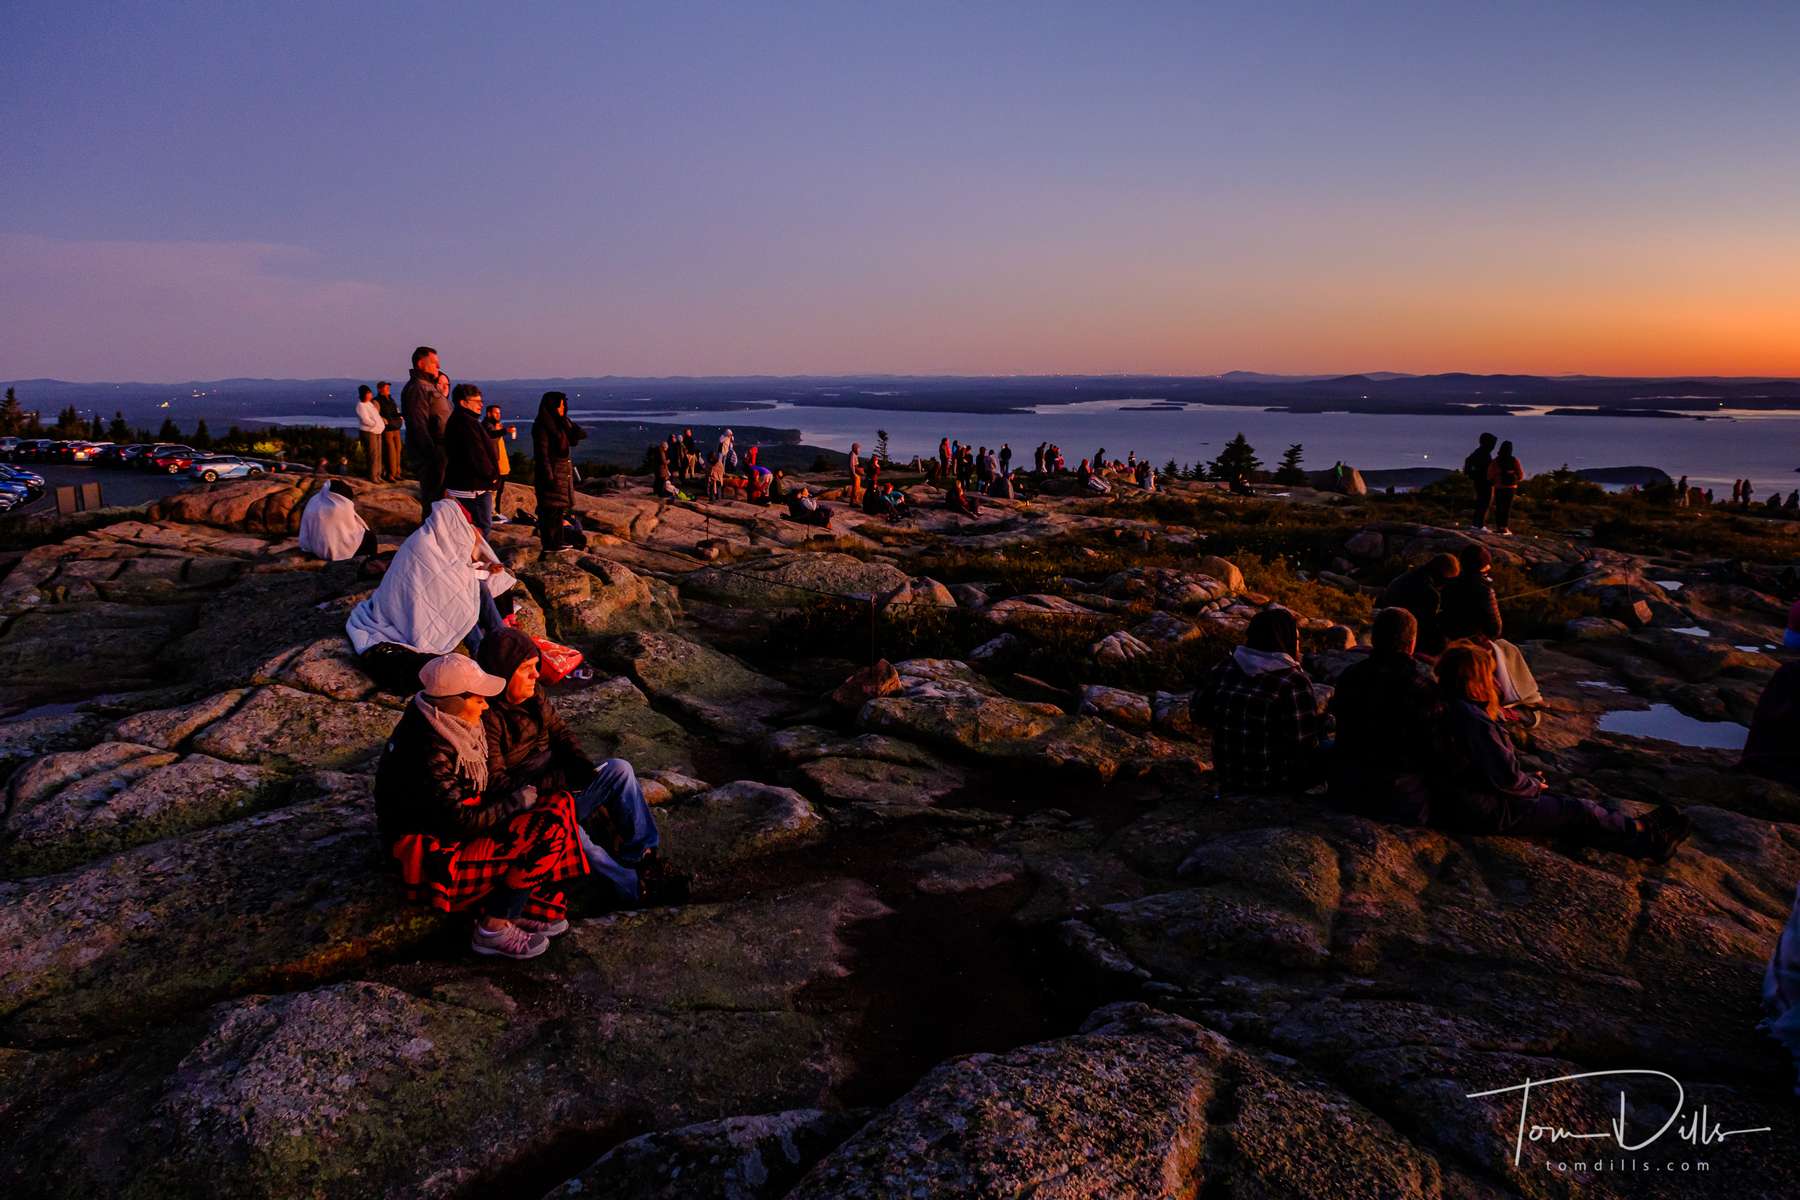 Waiting for sunrise atop Cadillac Mountain in Acadia National Park, Maine